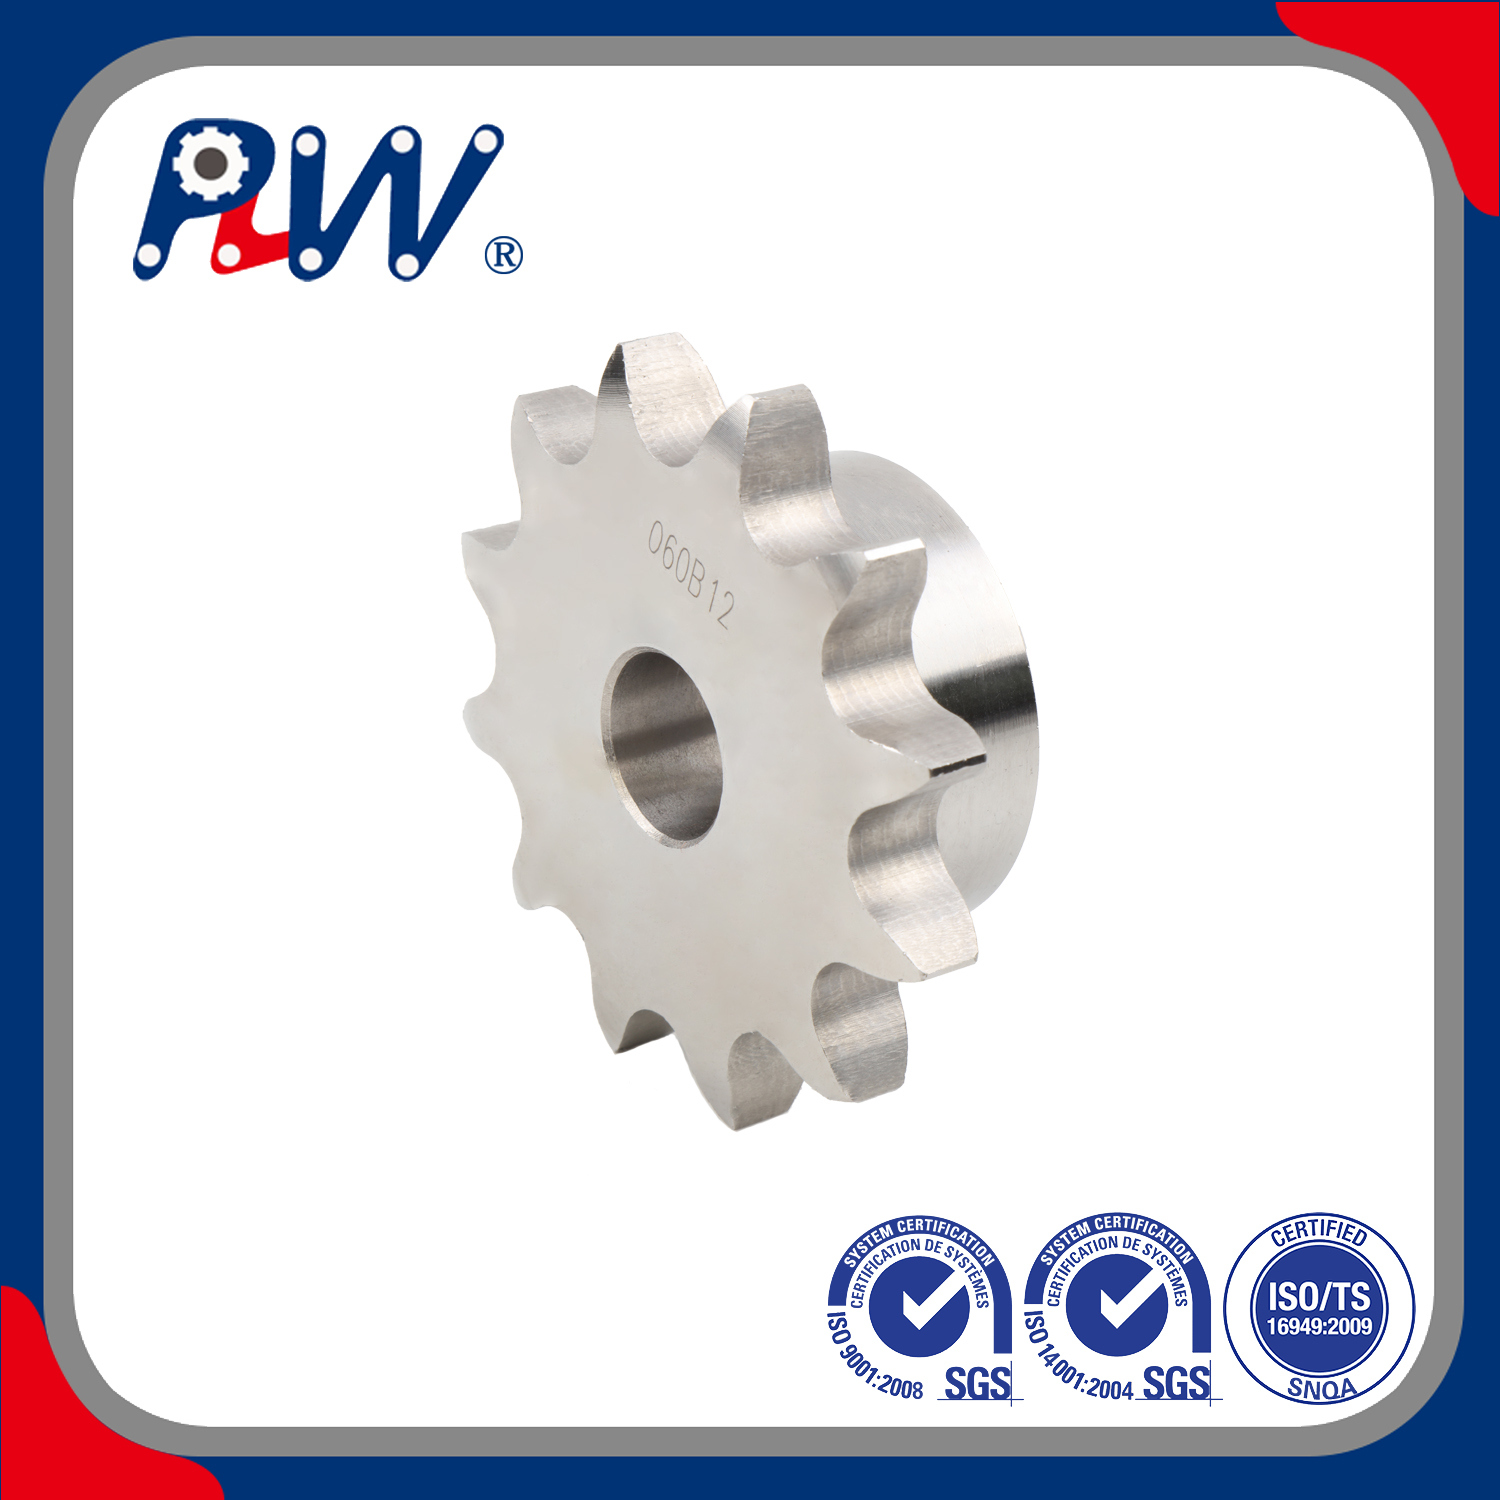 DIN 8187 Industry Sprocket Made to Order Stainless Steel Sprocket for Roller Chain & Agriculture Chain & Food Machinery (DIN, ANSI Standard) 